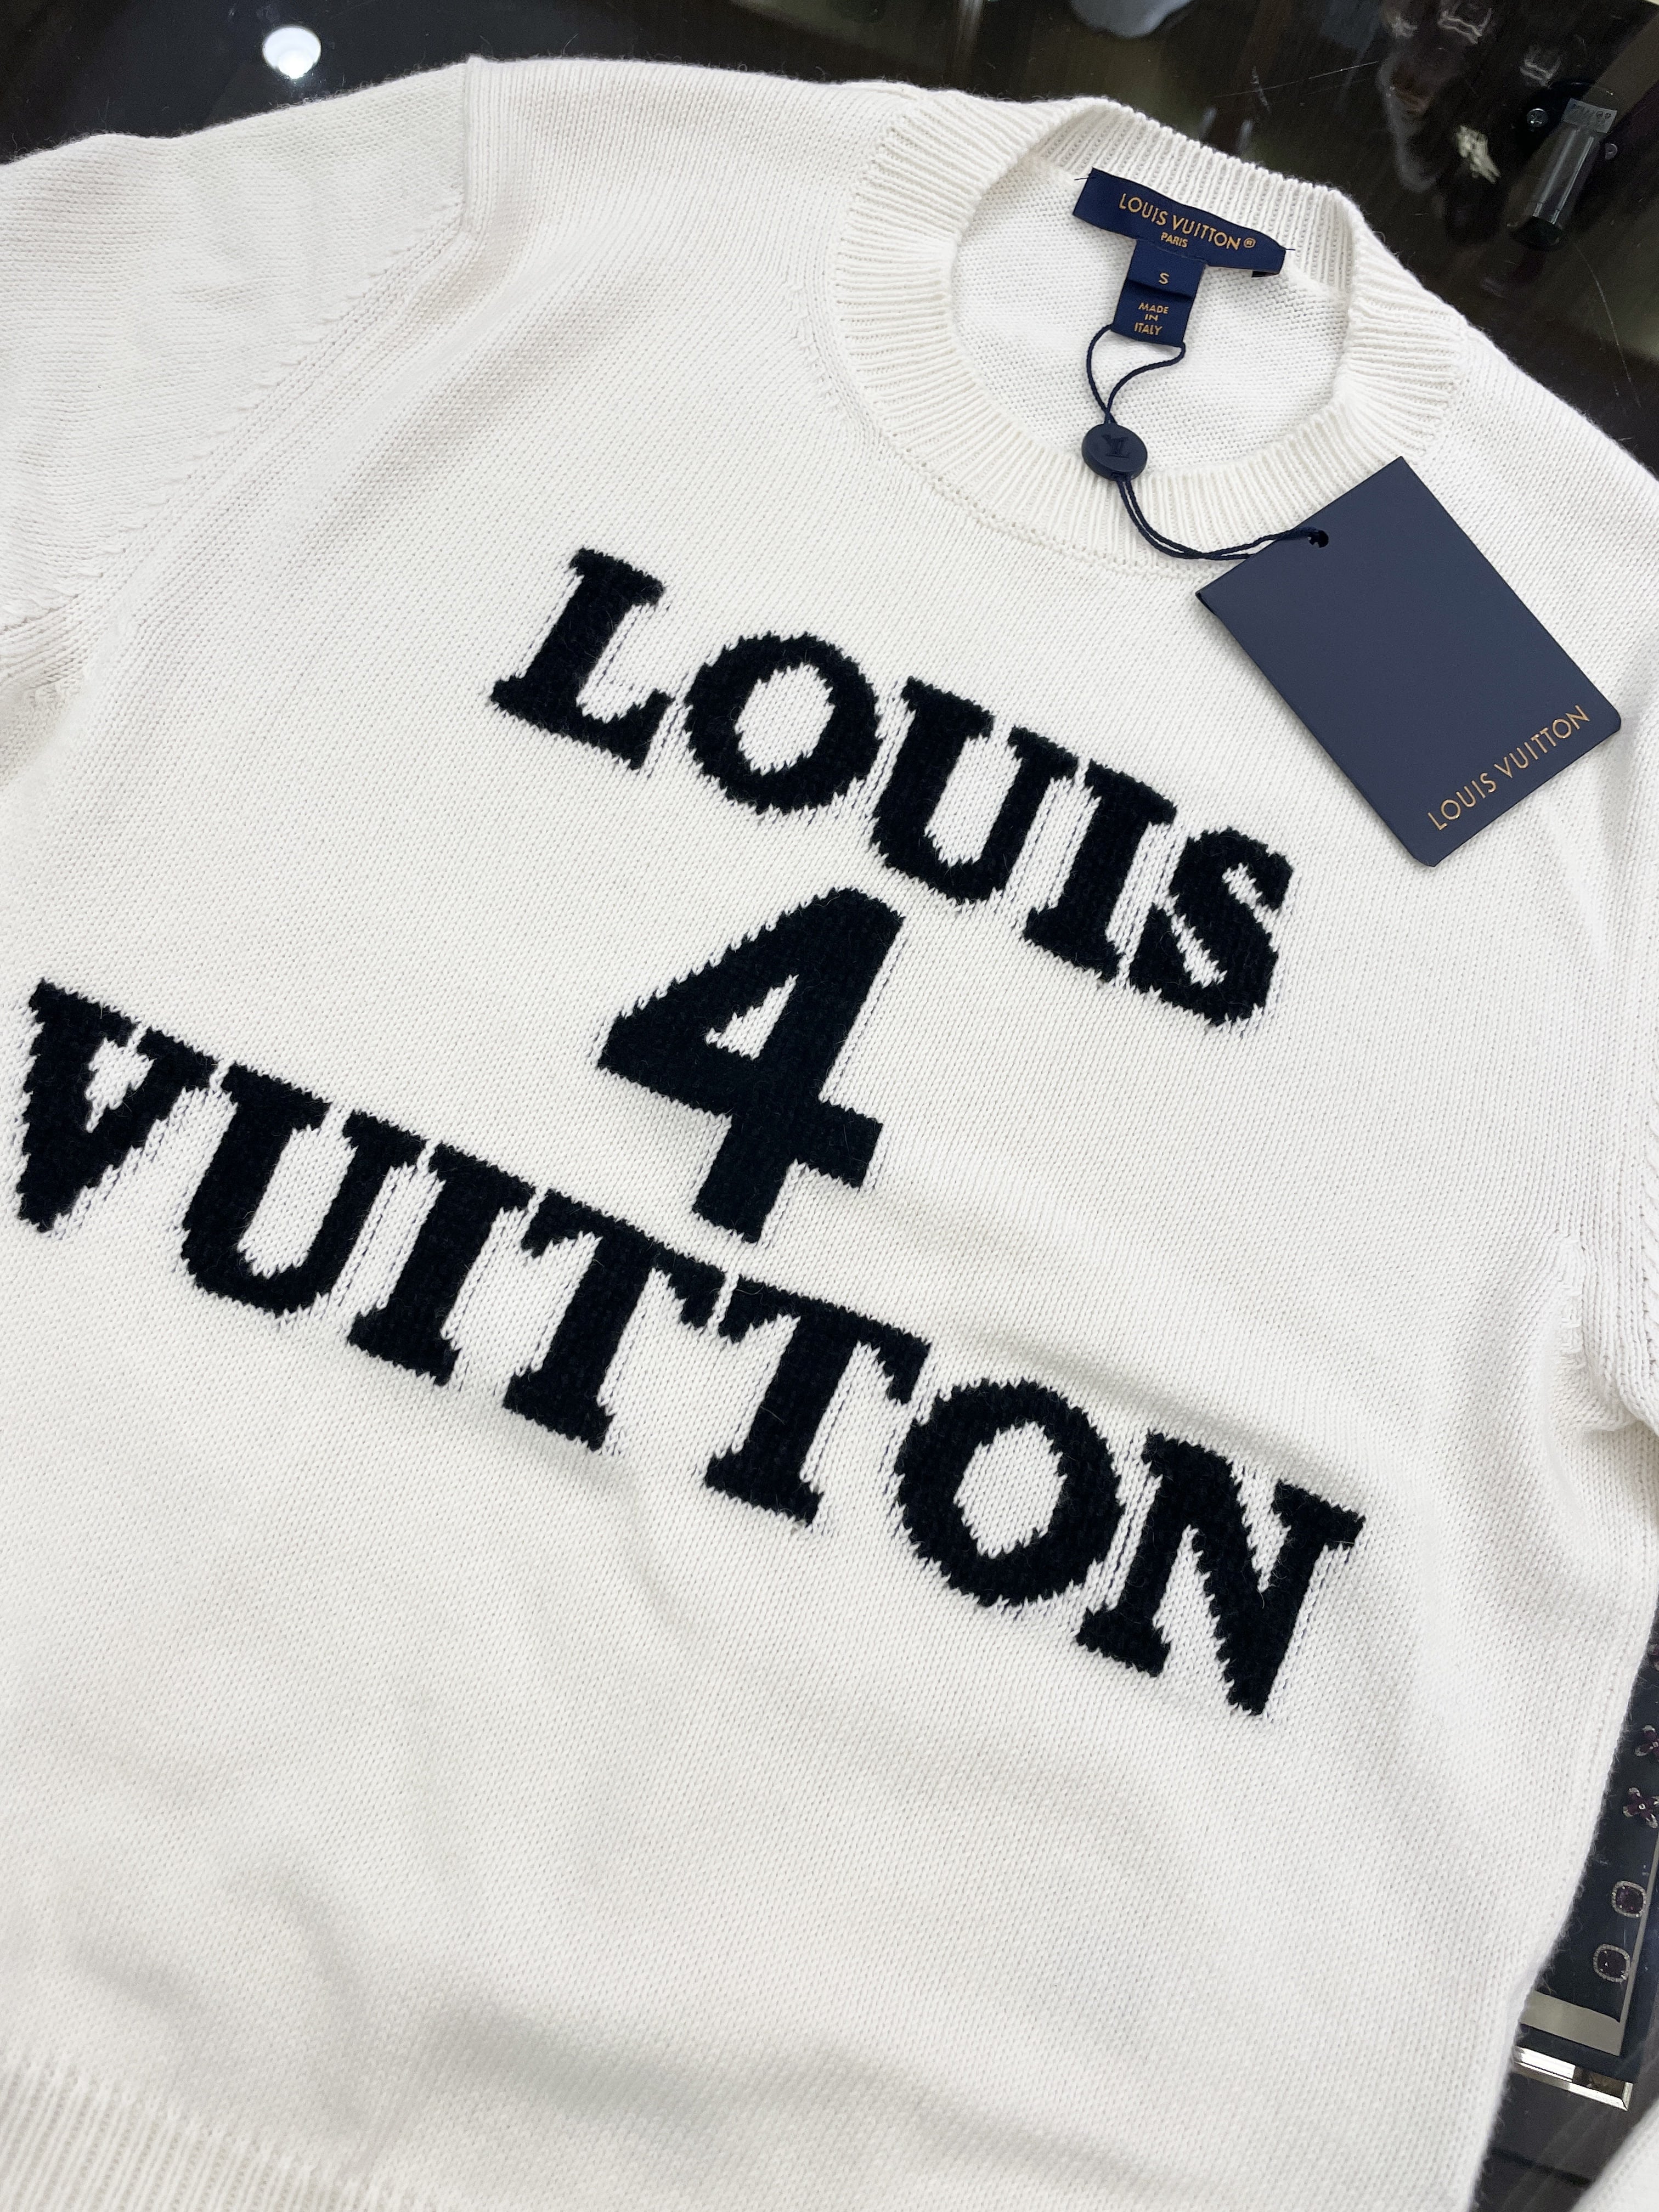 Louis 4 Vuitton Knitted Pullover White /Black